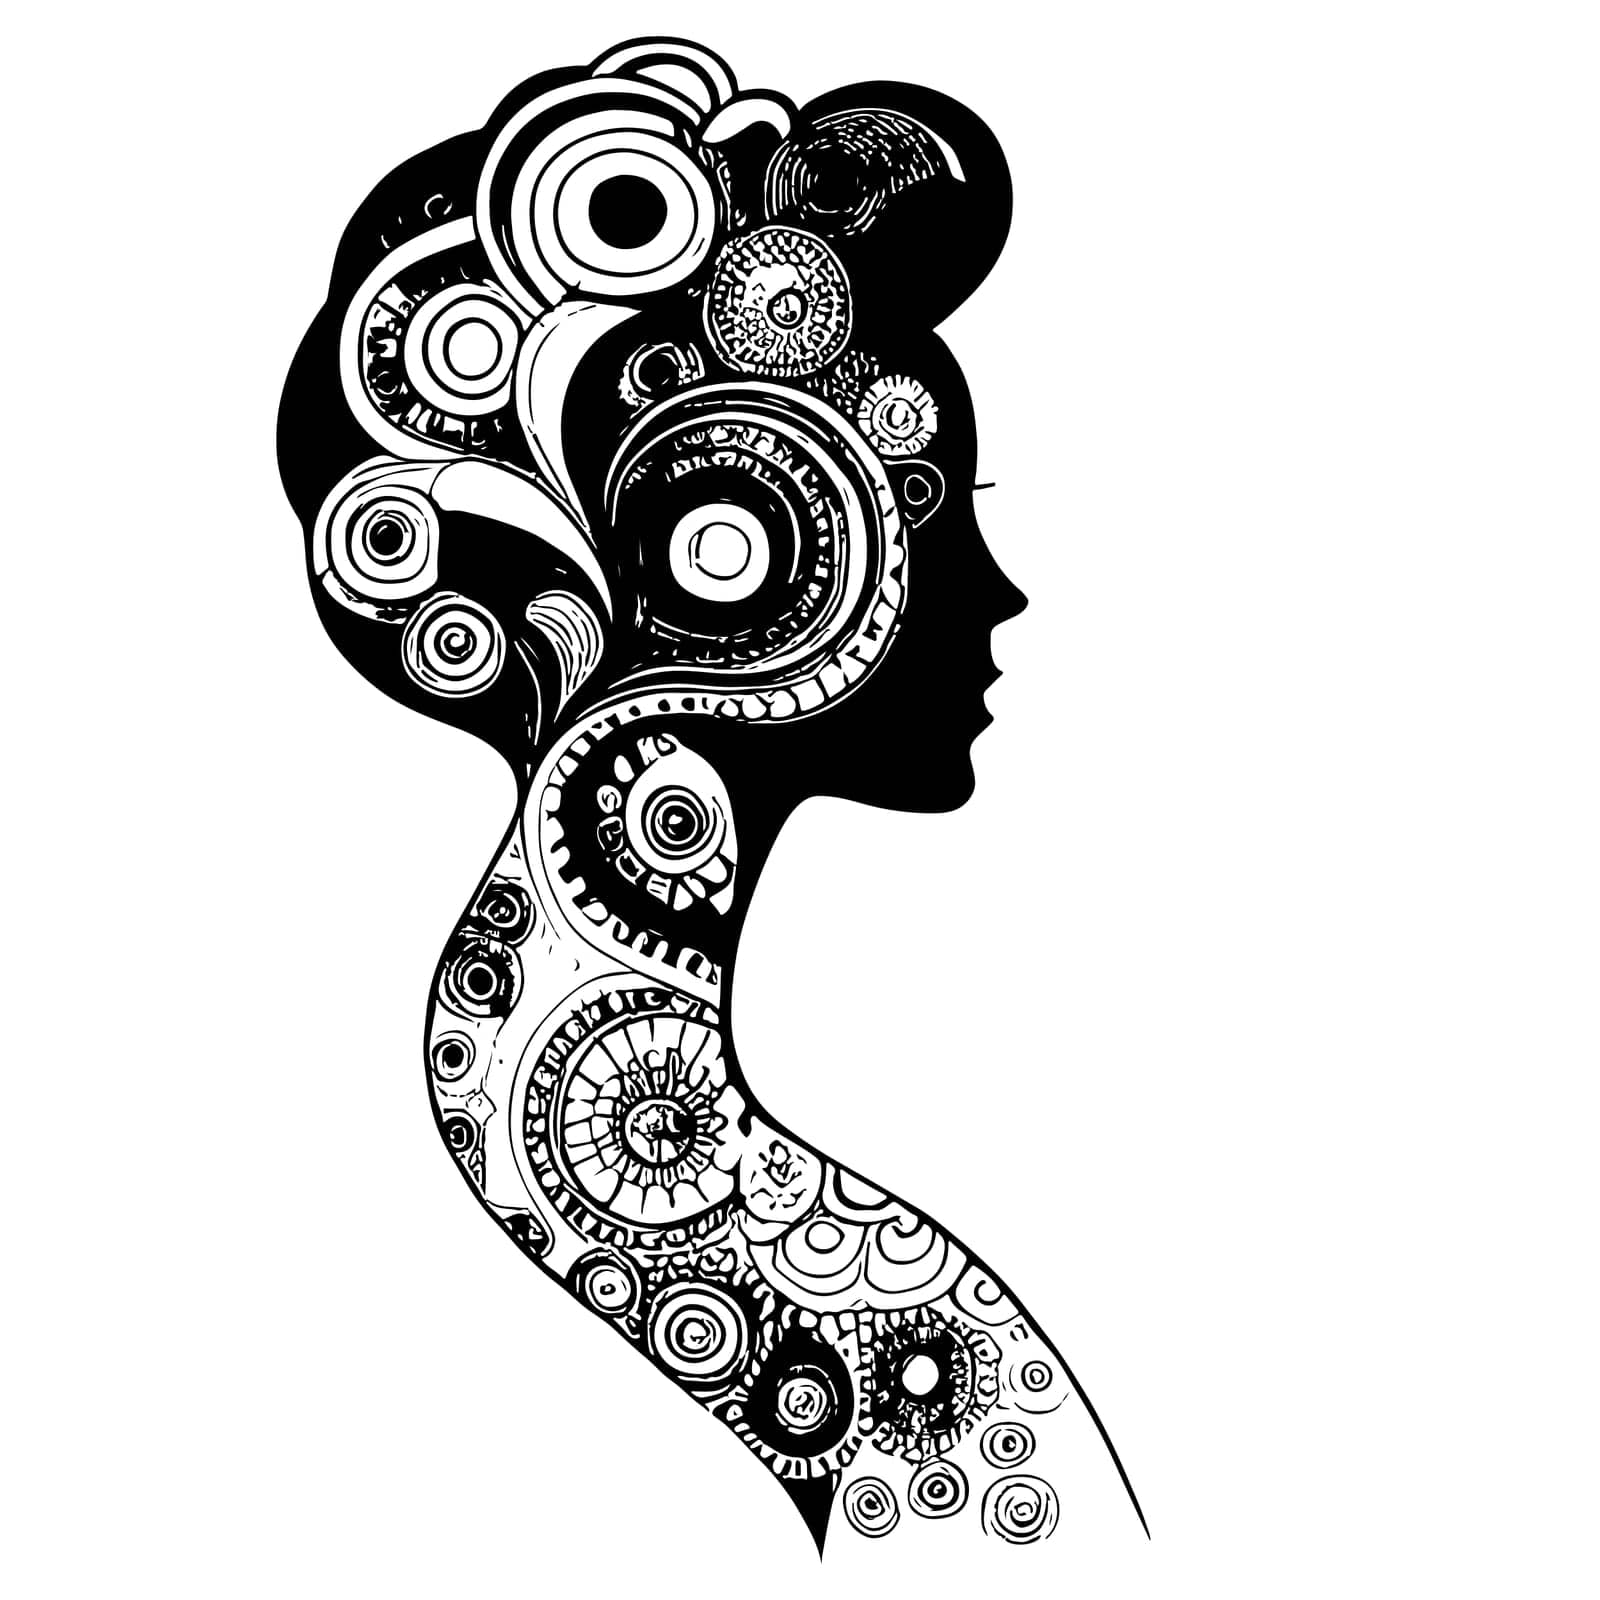 Sketch of beautiful woman silhouette with art hairstyle black and white design